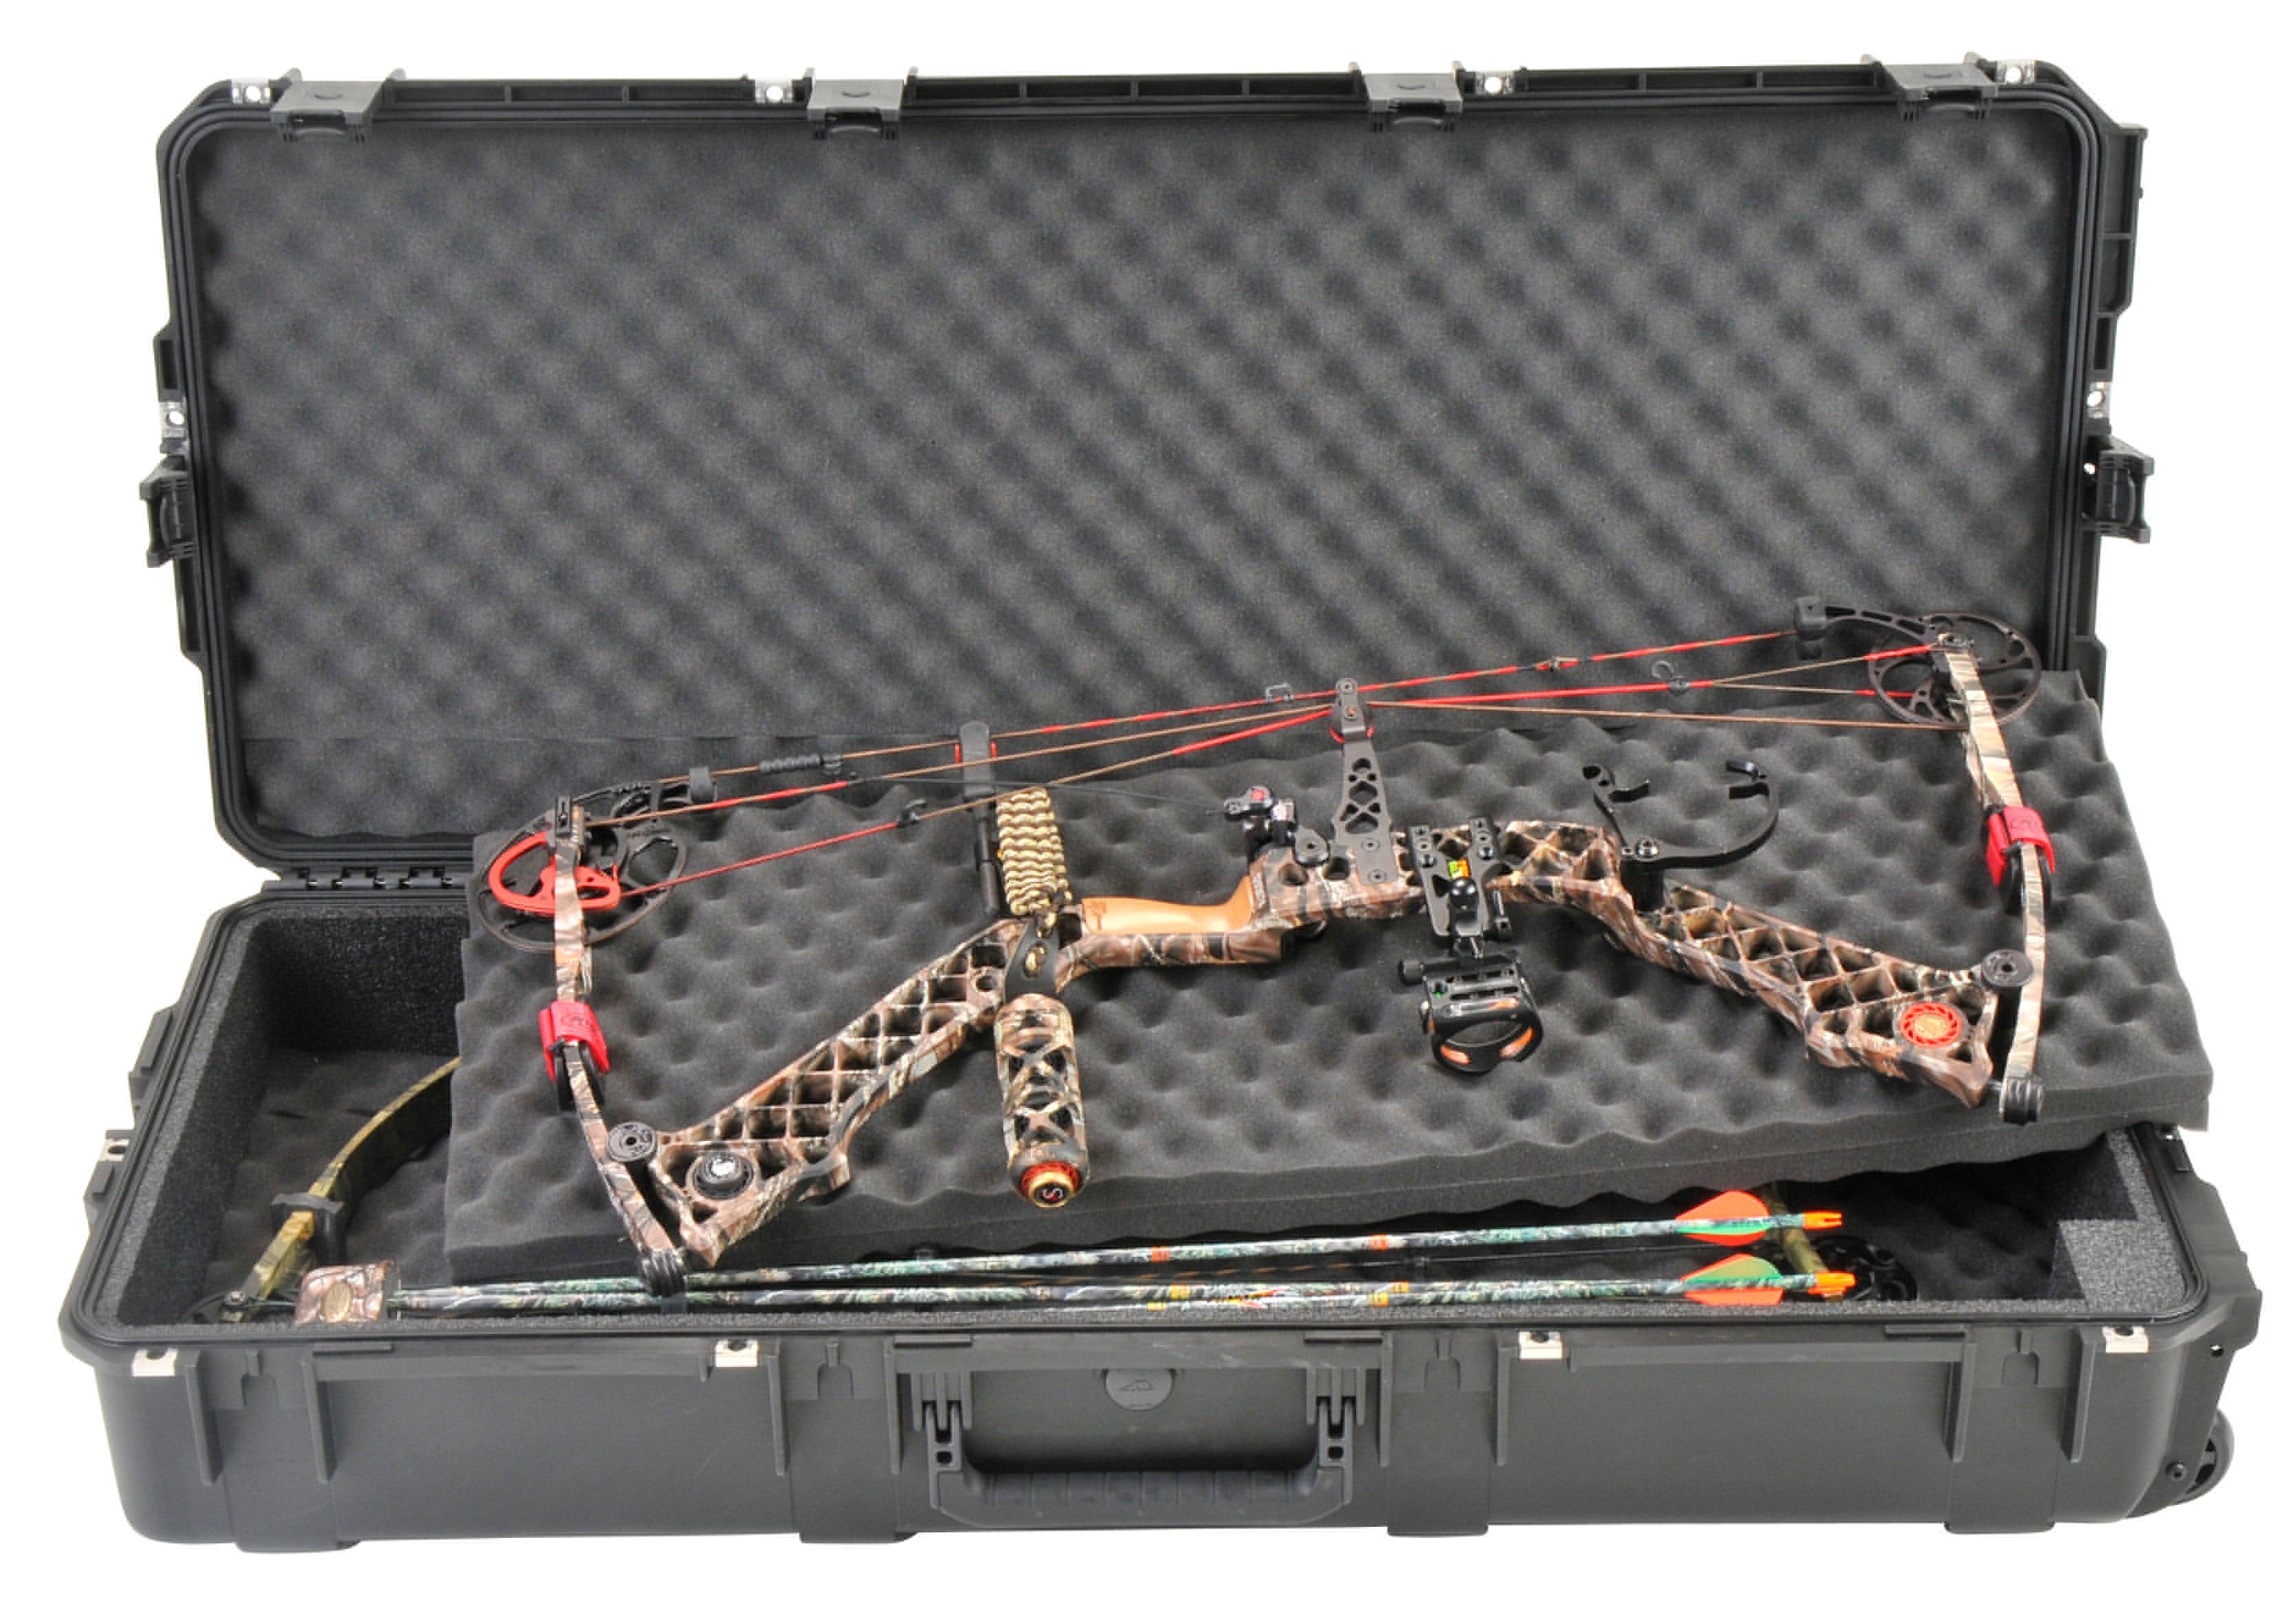 SKB Waterproof Weapons Case with layered Foam